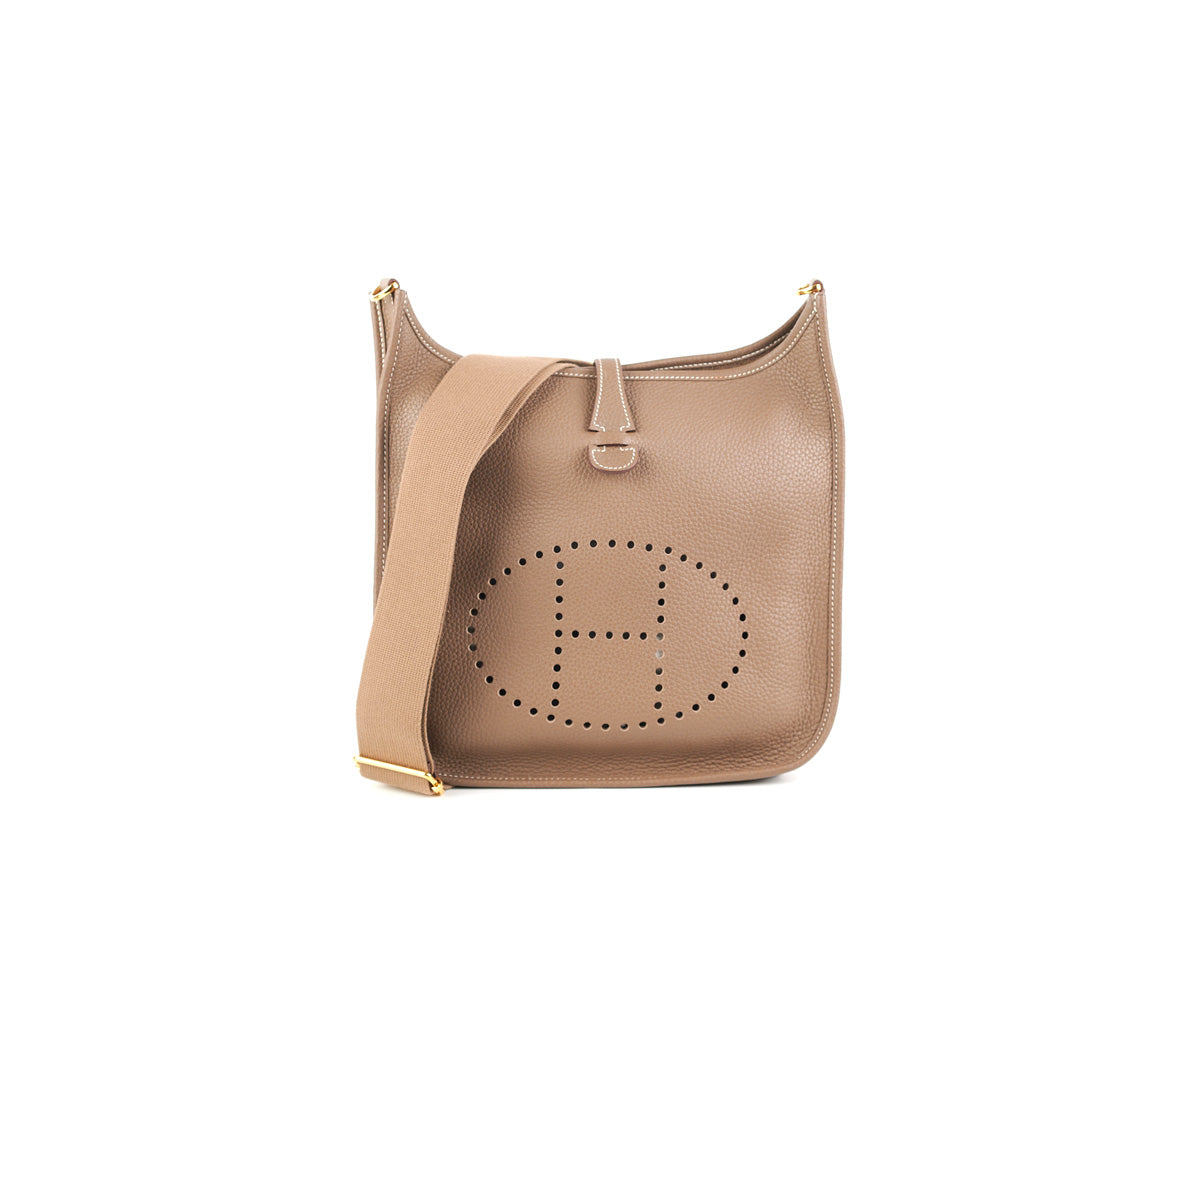 Hermes Evelyne PM (29) Clemence Etoupe - Stamp Y - THE PURSE AFFAIR